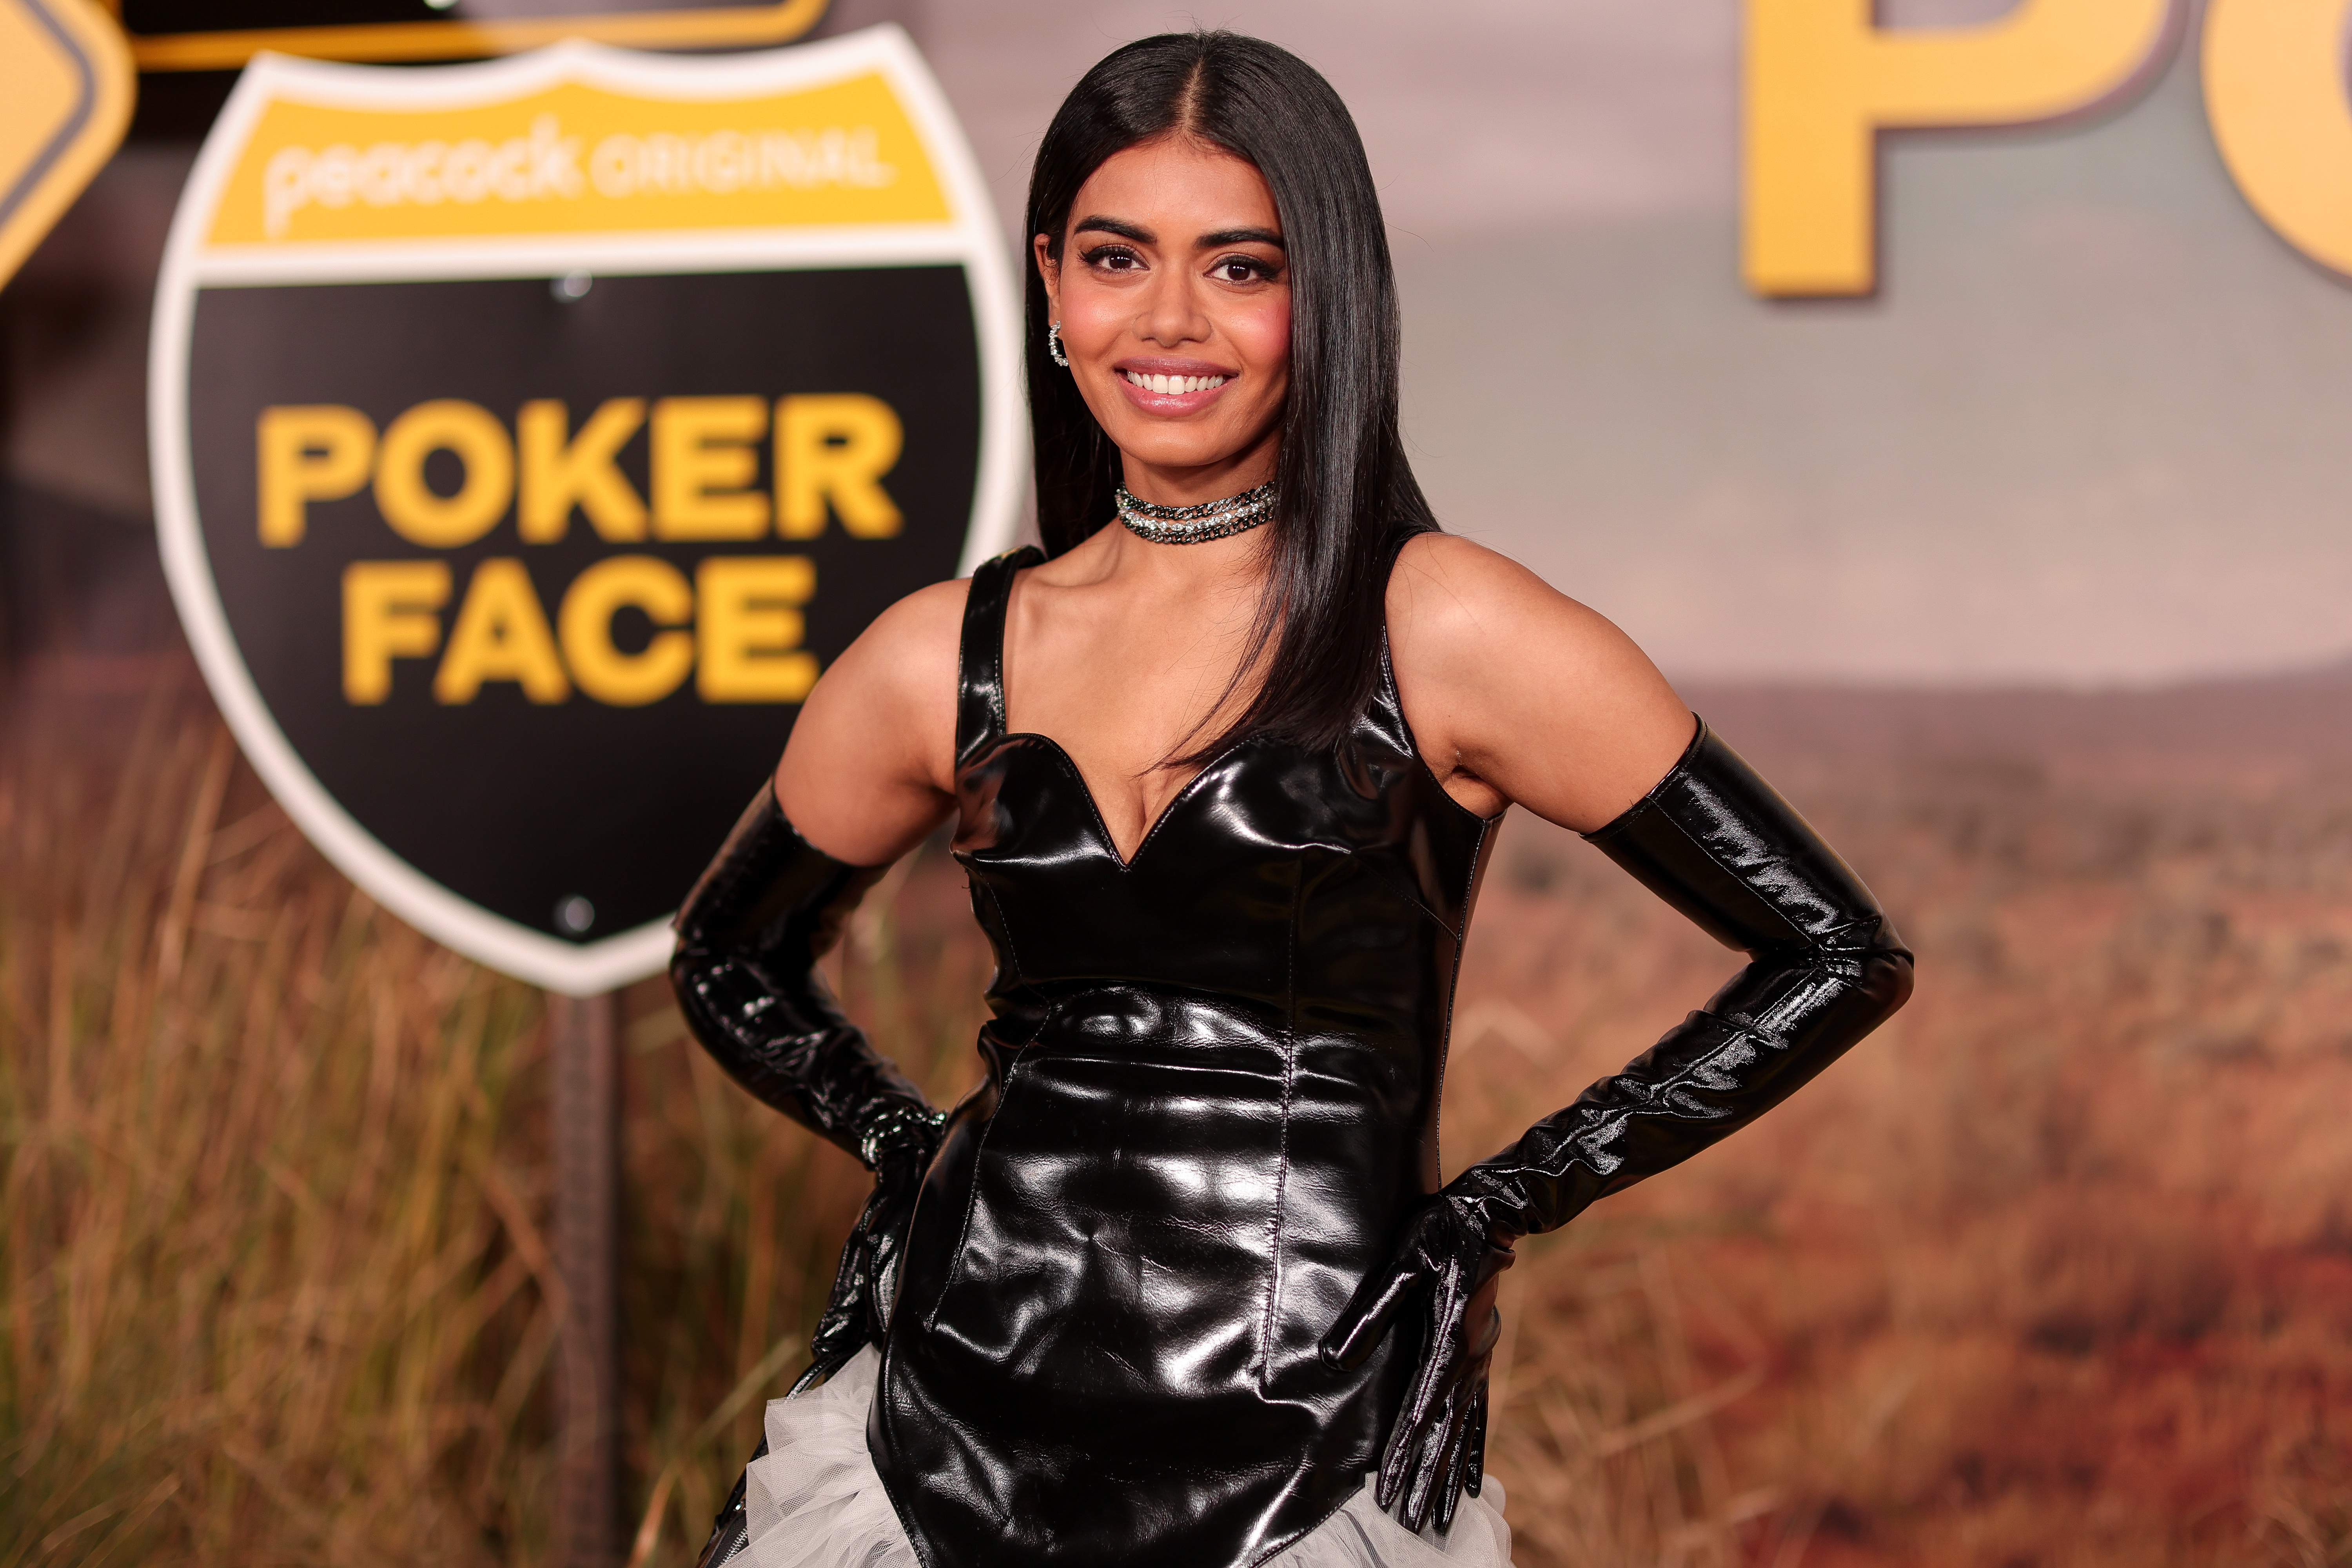 Megan Suri at the premiere of "Poker Face" held at Hollywood Legion Theater on January 17, 2023 in Los Angeles, California. | Source: Getty Images